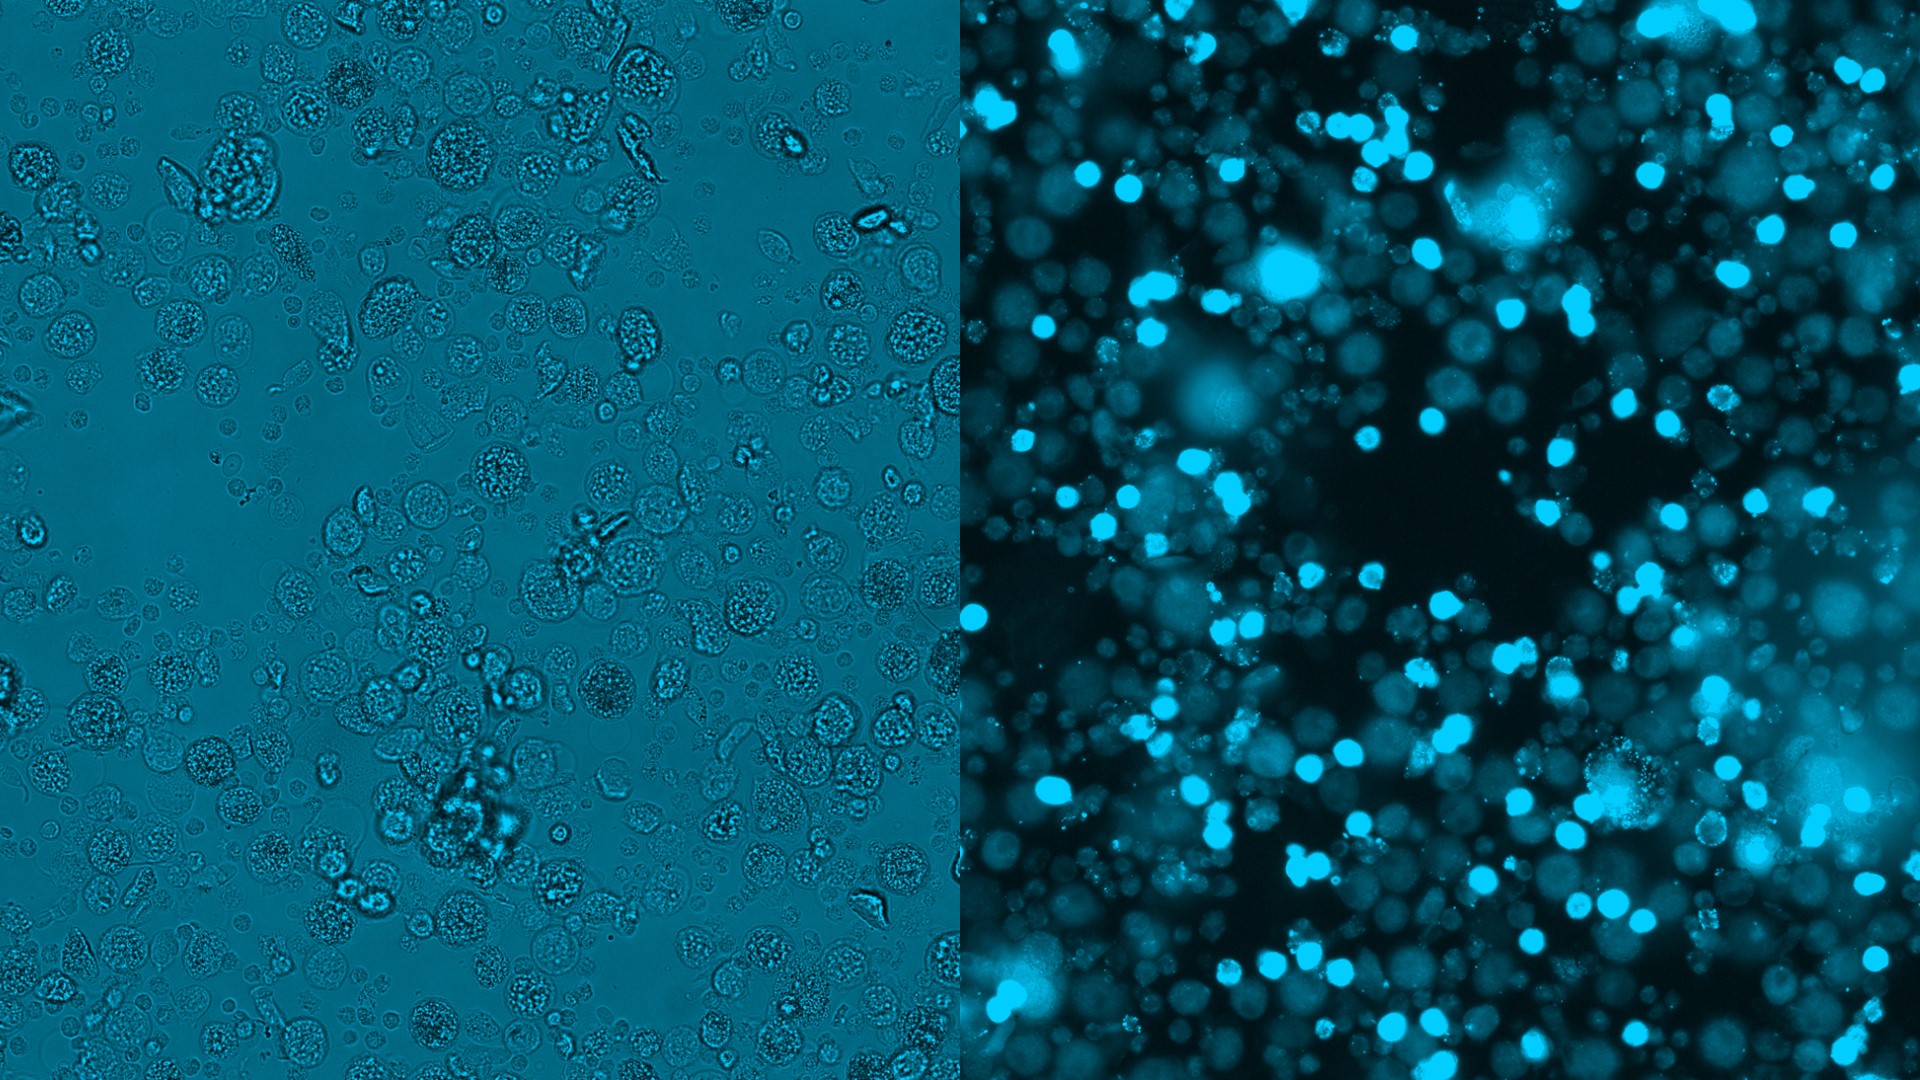 Cell populations within a sputum sample, e.g. macrophages and granulocytes, differ morphologically and biologically. Chip cytometry enables direct comparison of a morphological transmitted-light image and fluorescence staining at the single-cell level.